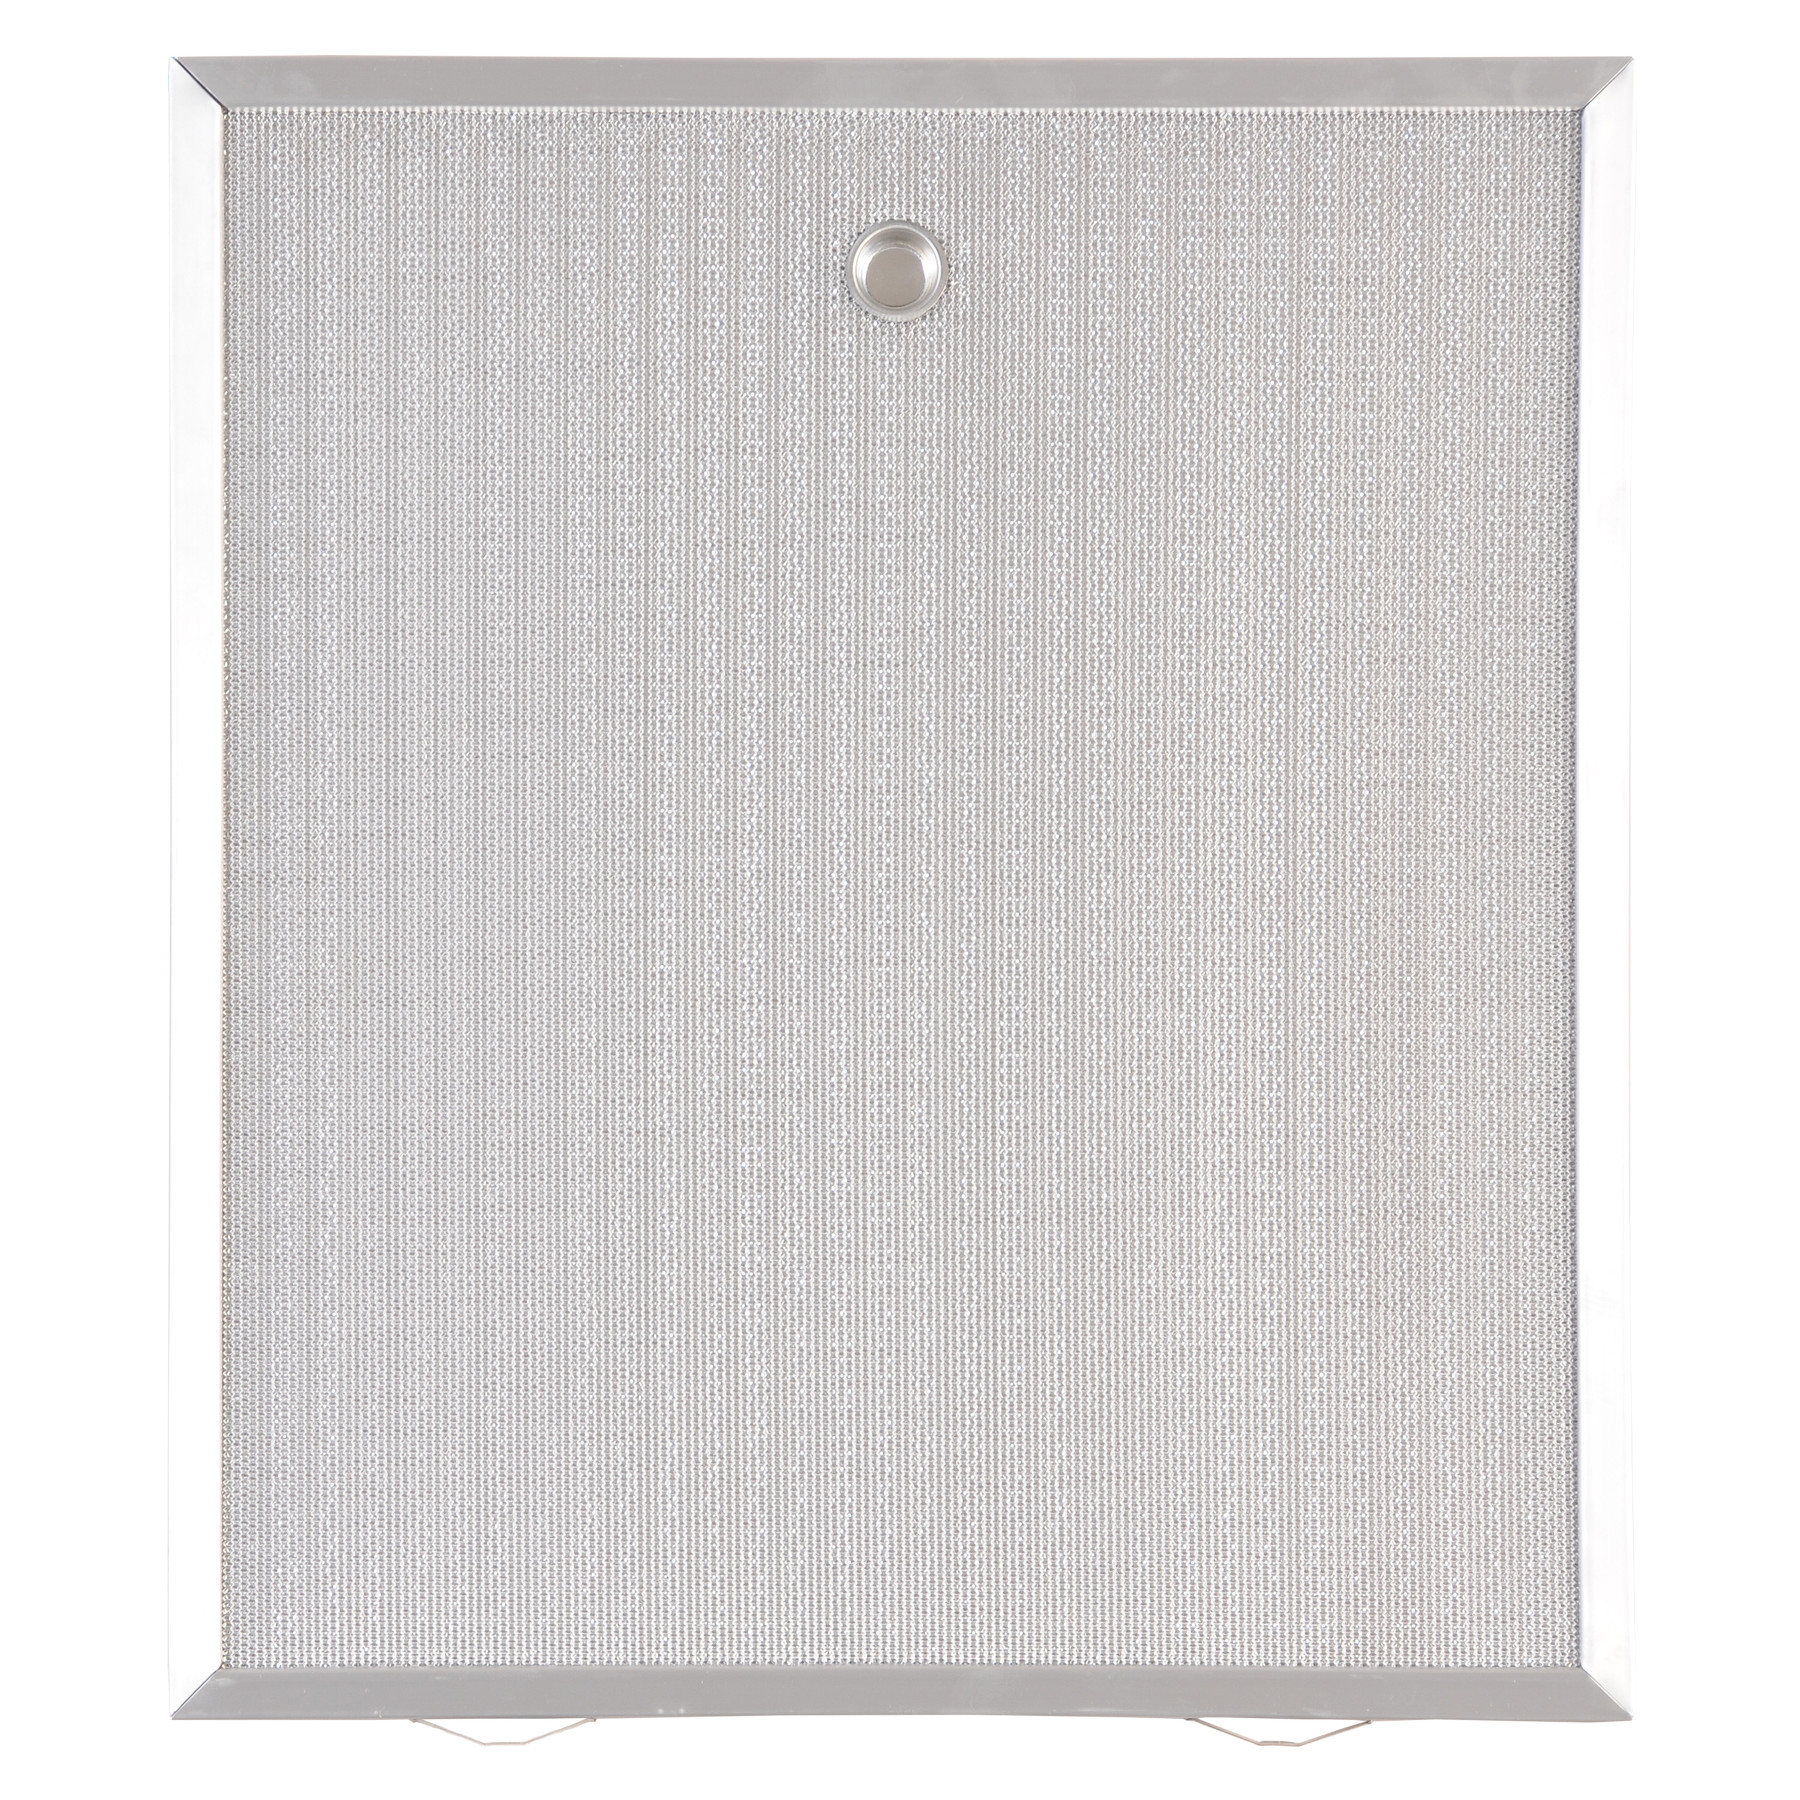 24-Inch Replacement aluminum filter for BCS3 series